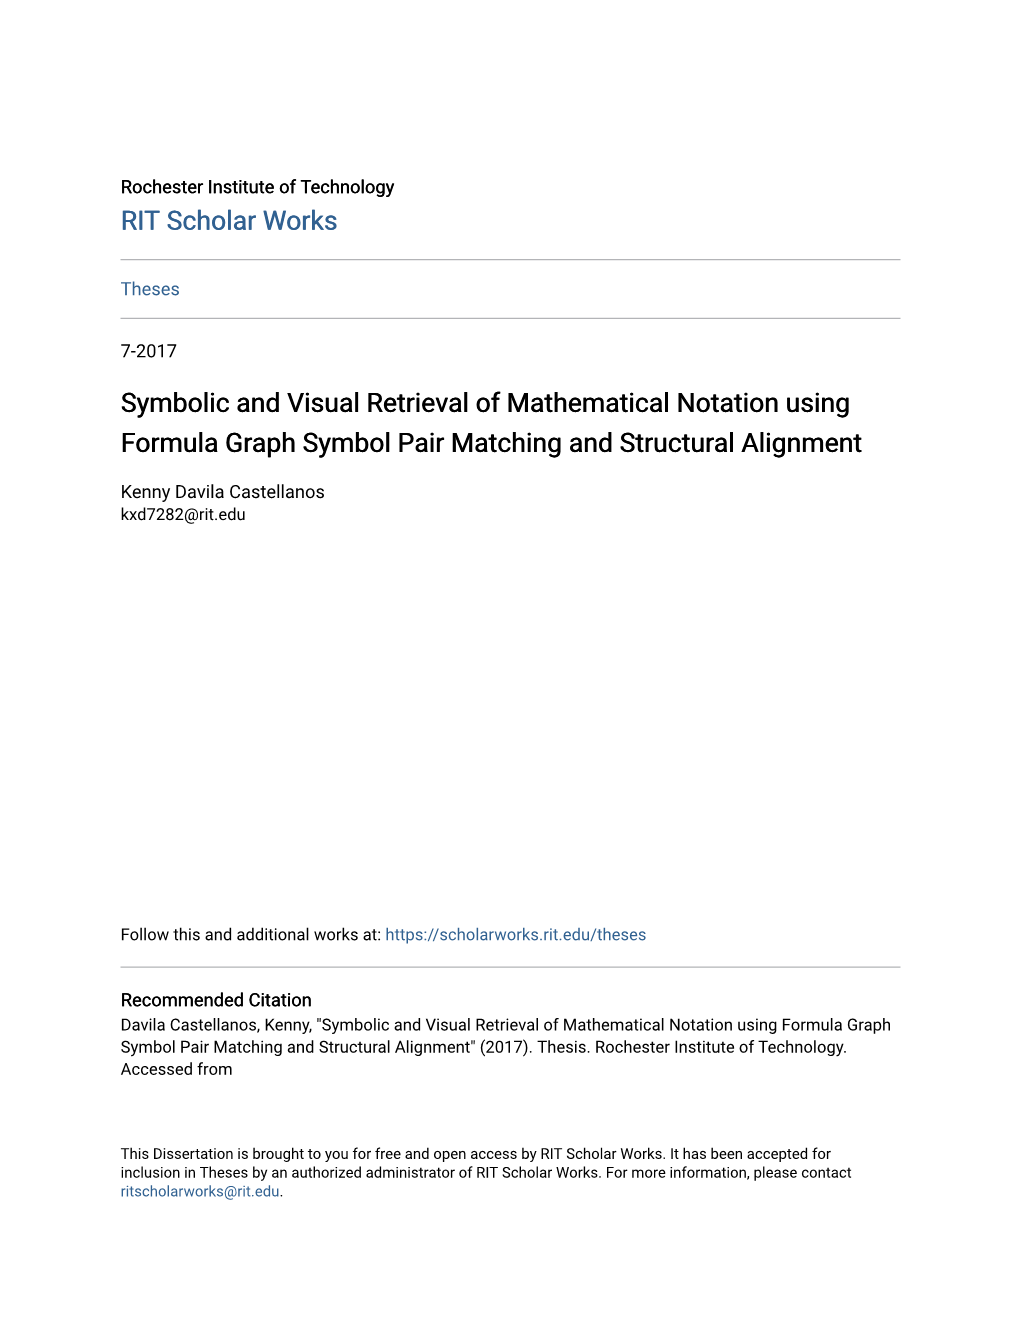 Symbolic and Visual Retrieval of Mathematical Notation Using Formula Graph Symbol Pair Matching and Structural Alignment